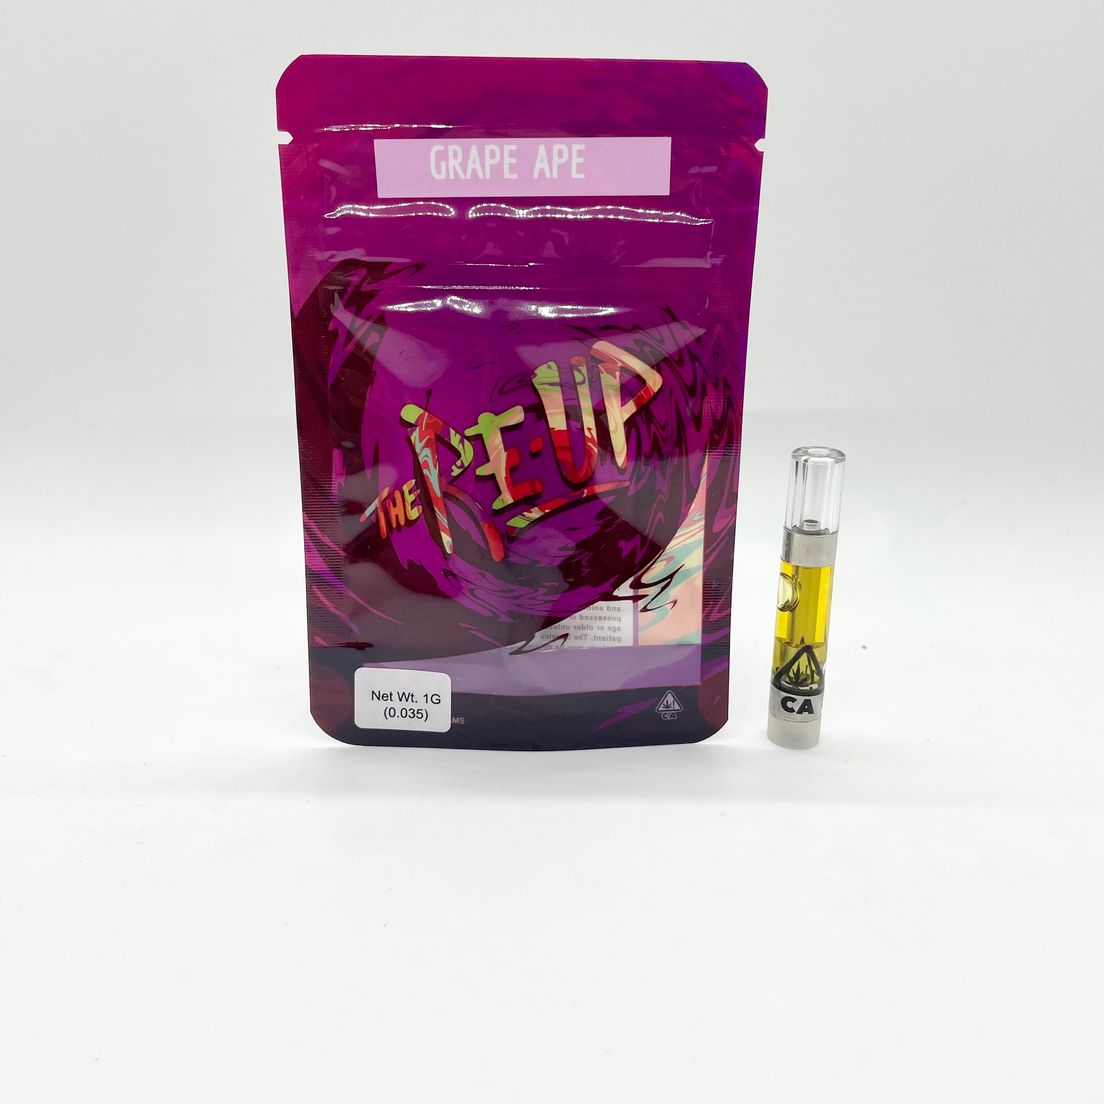 1g Grape Ape (Indica) CCELL Cartridge - The Re-Up